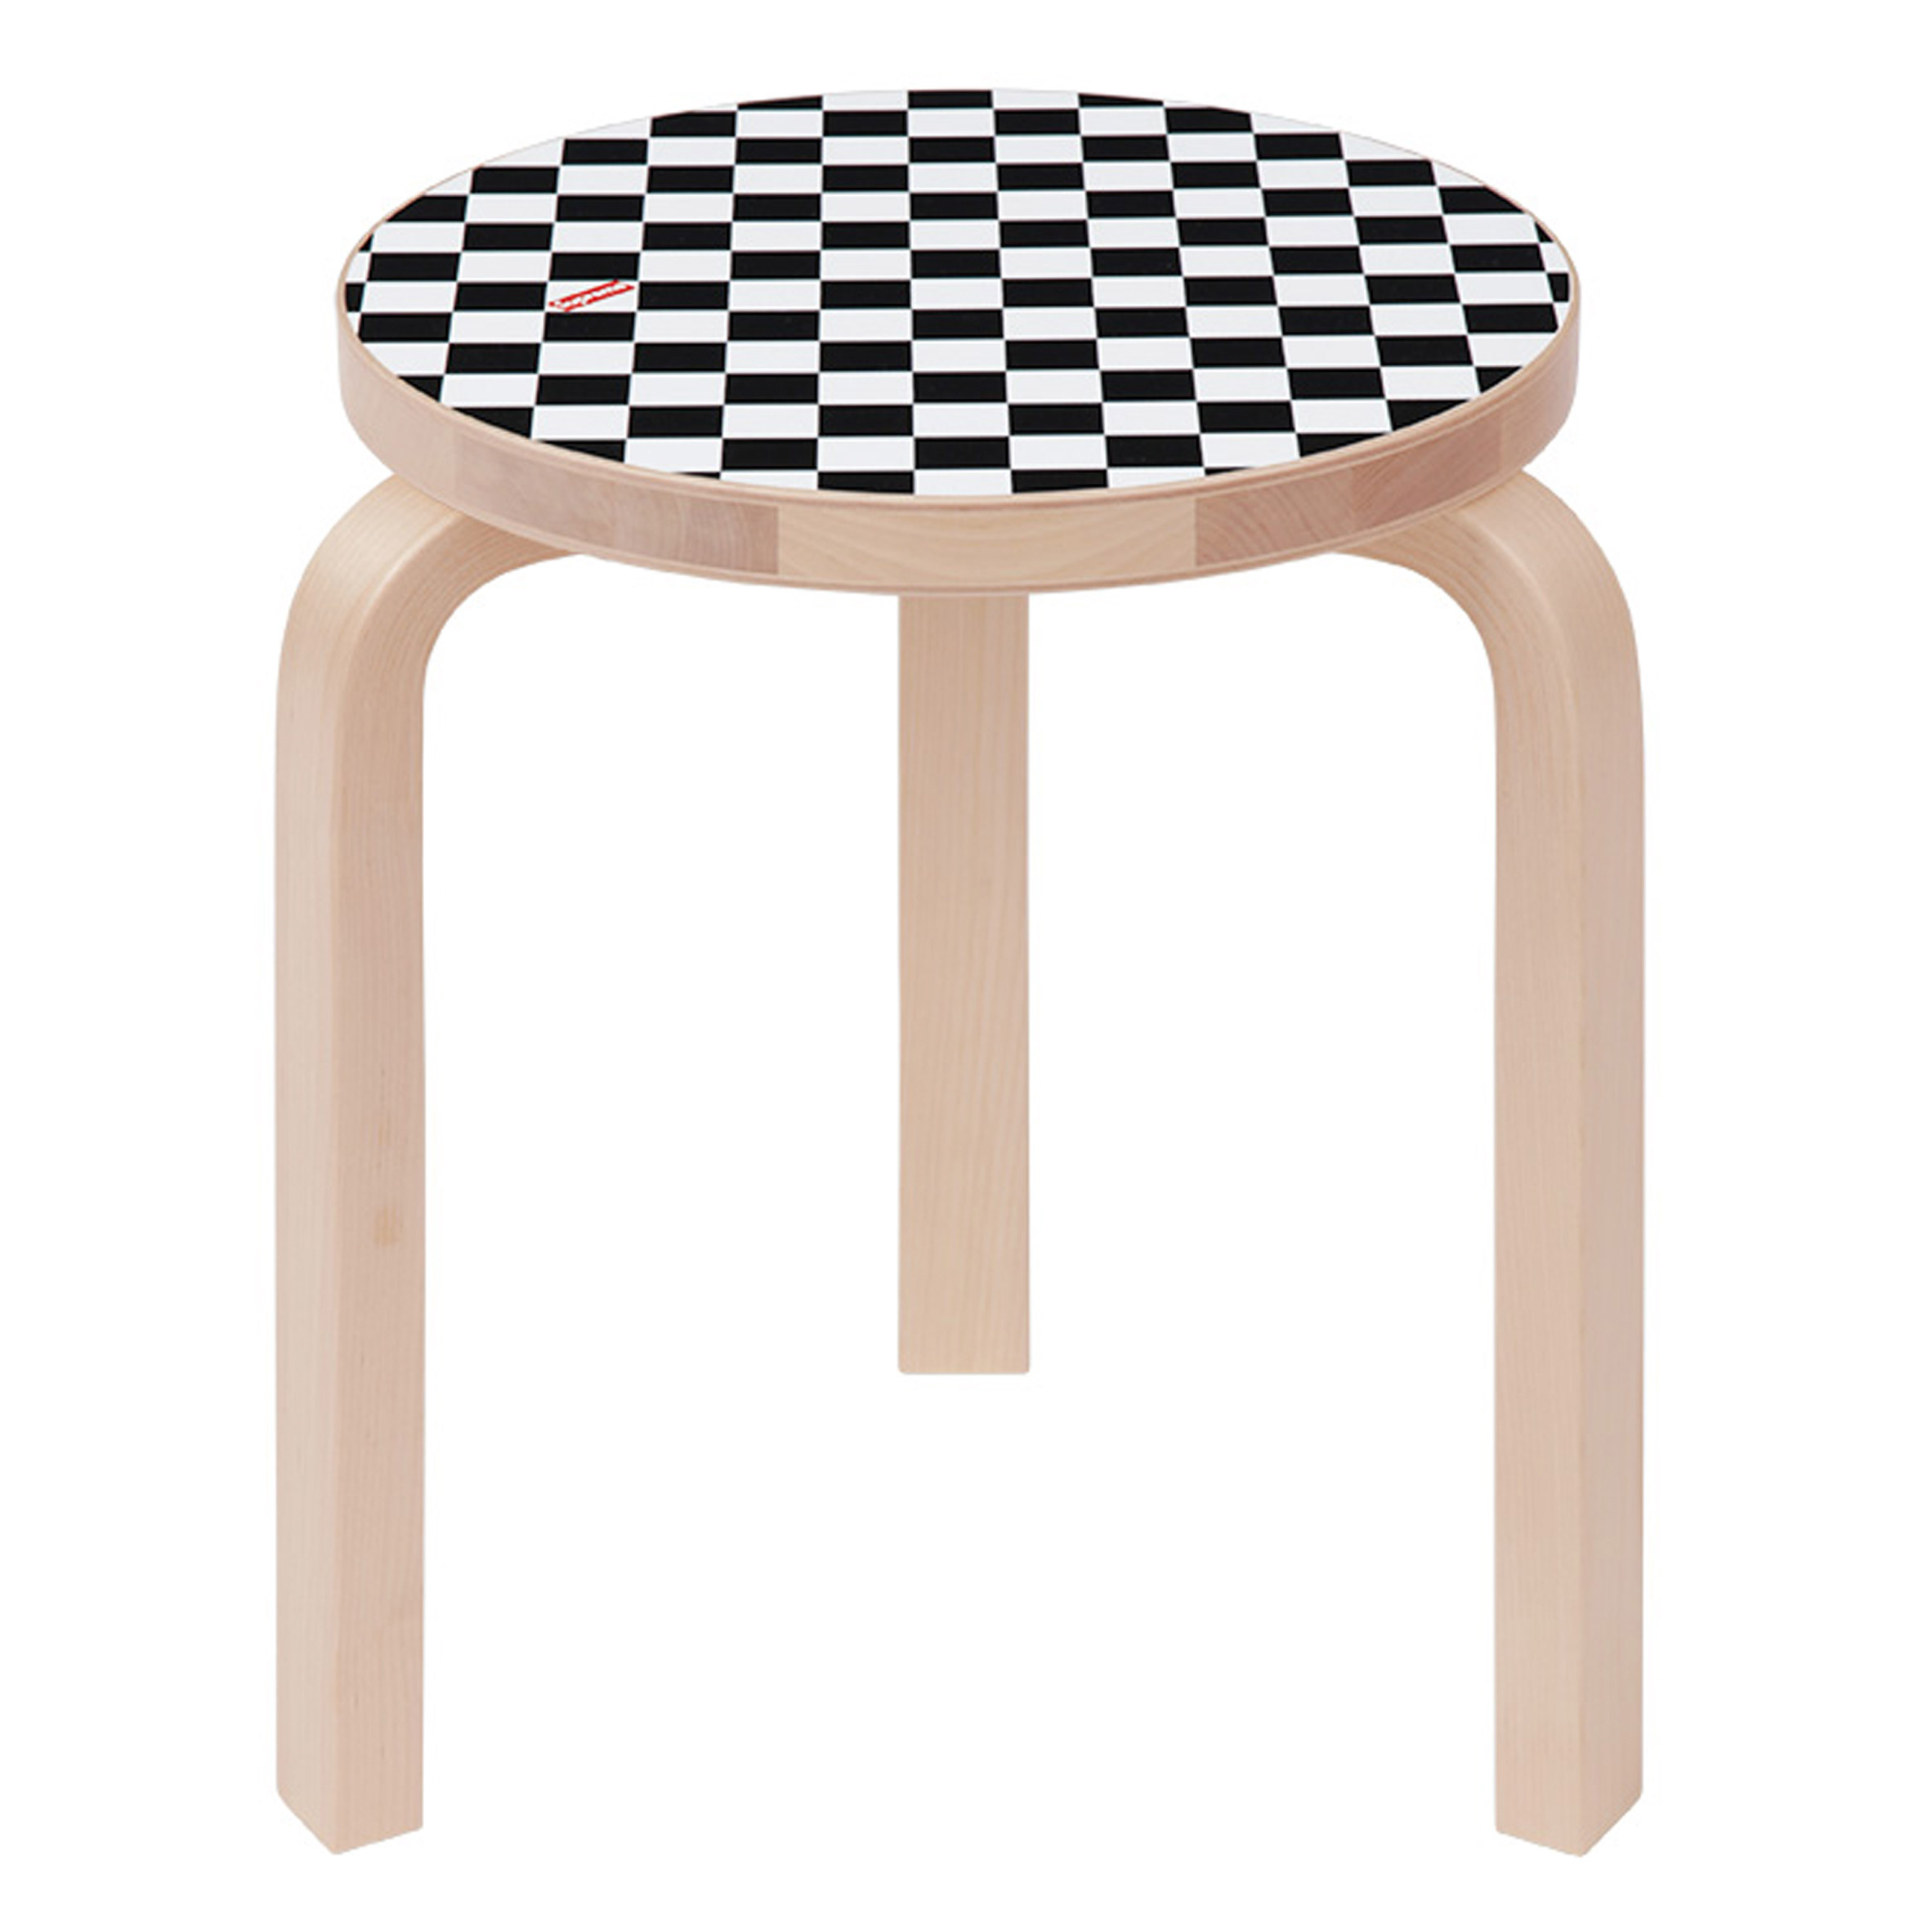 Supreme unveils chequerboard edition of Artek's iconic Aalto Stool 60